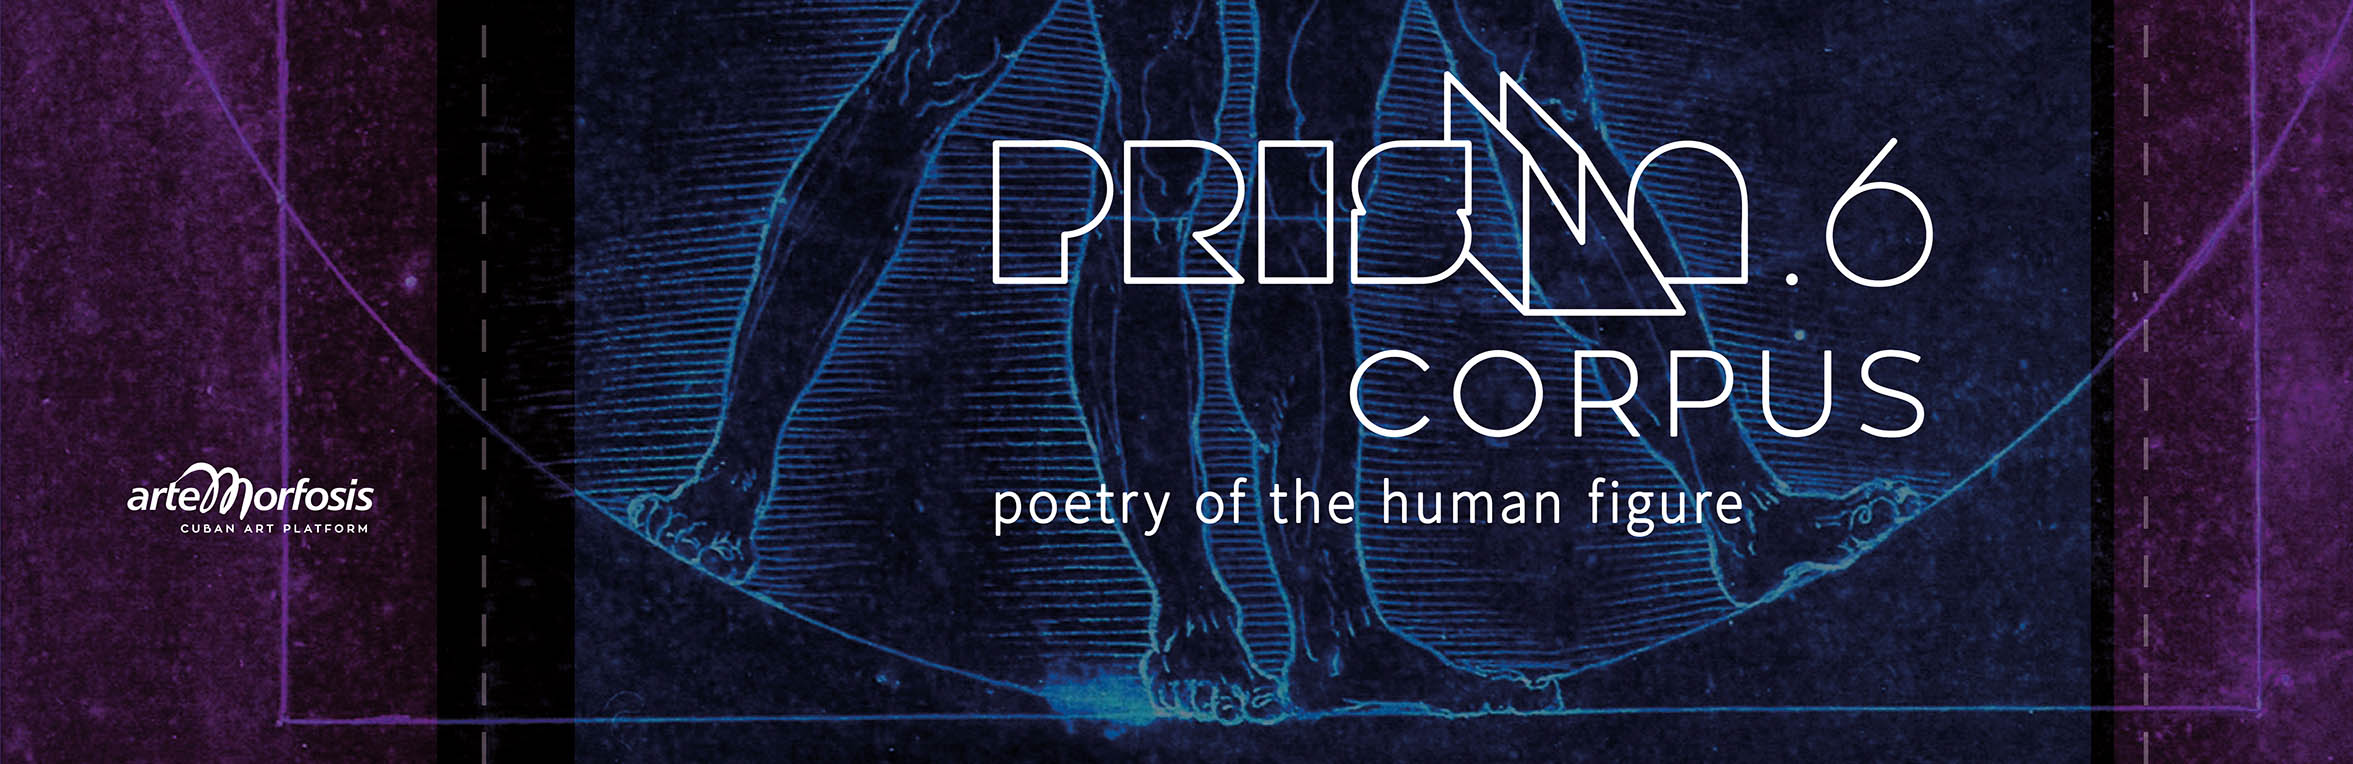 PRISMA 6 - Call for Artist - Poetry of the Human Figure